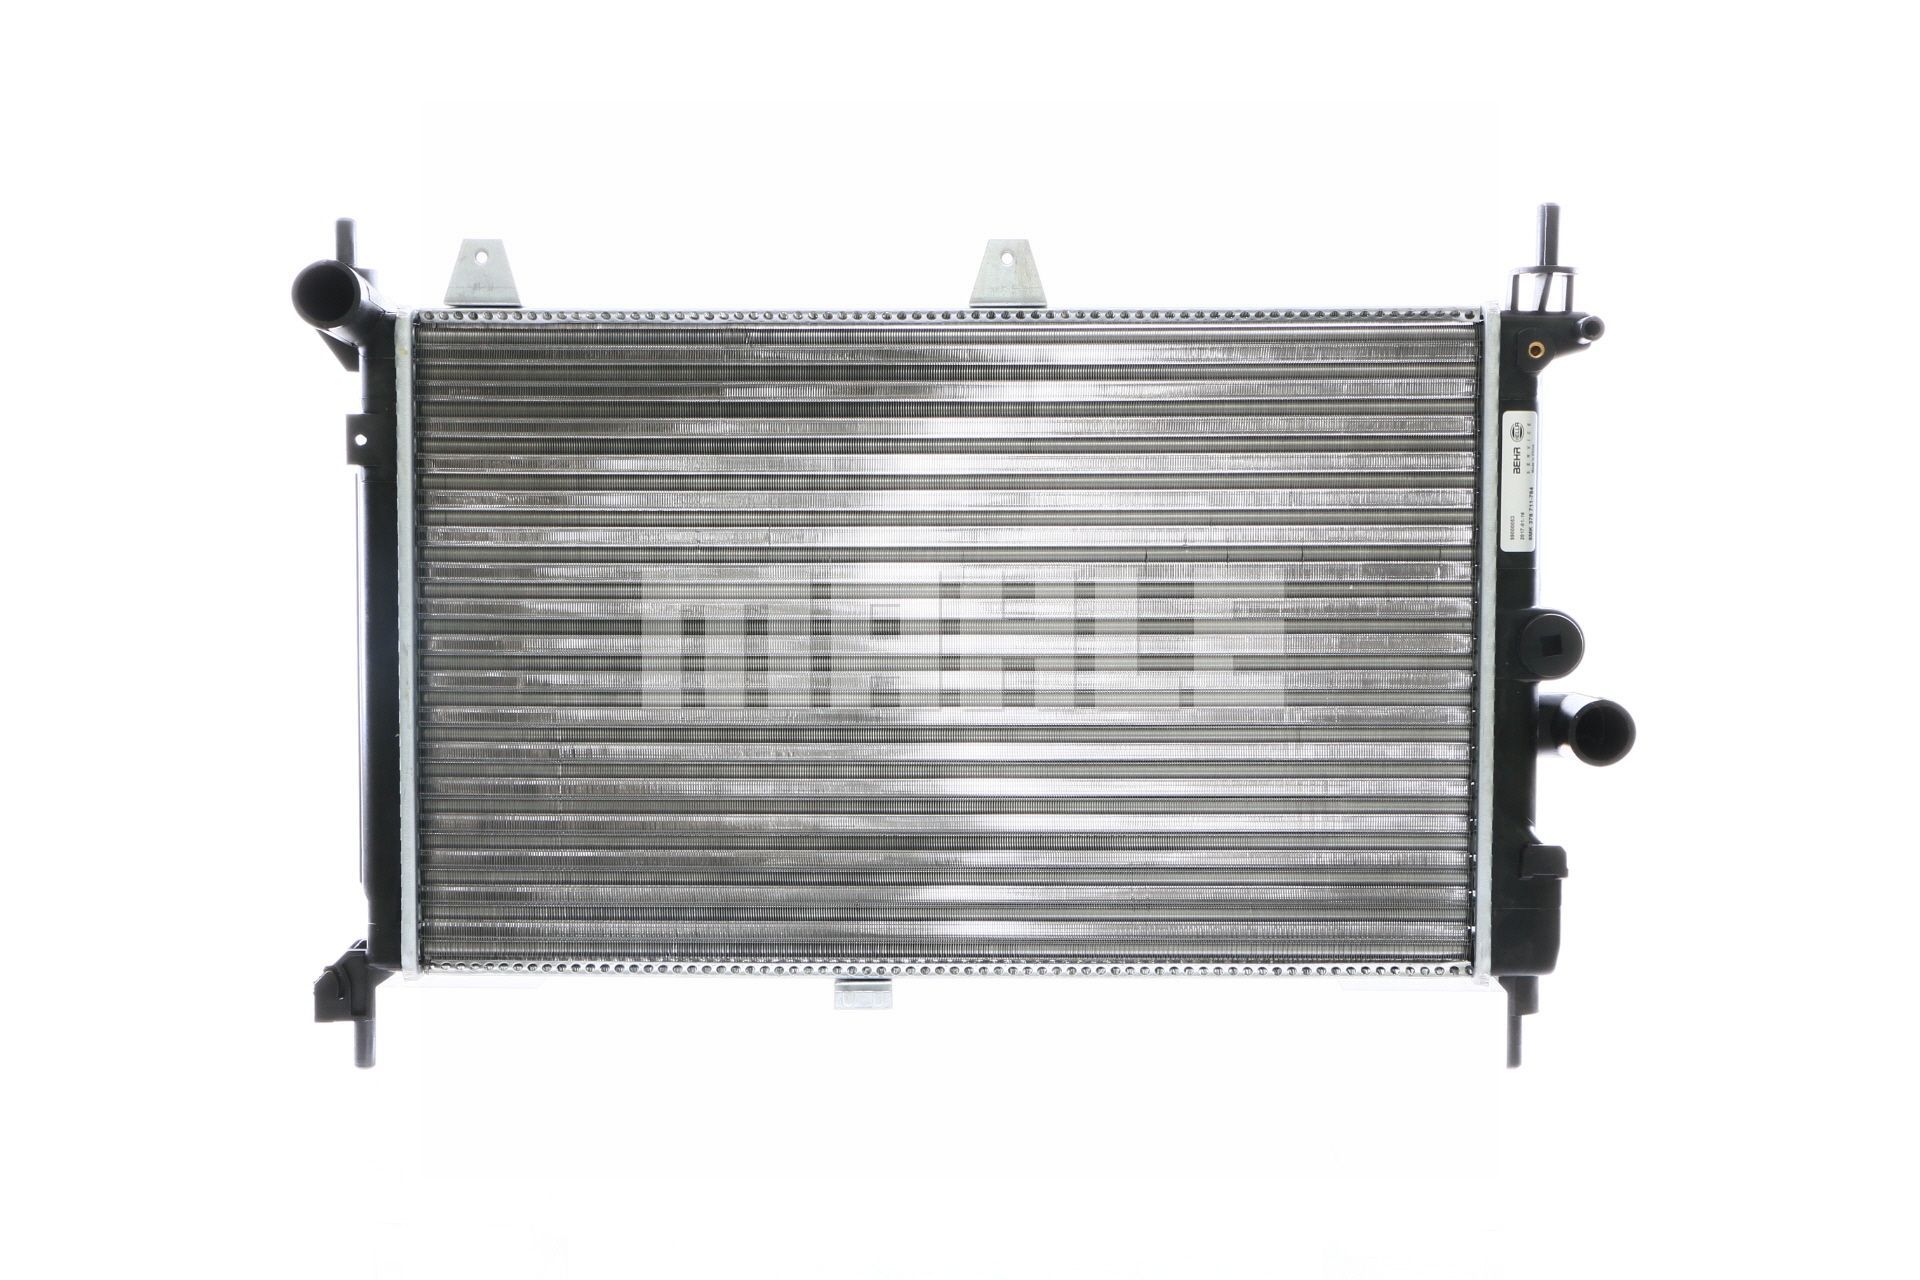 MAHLE ORIGINAL CR 267 000S Engine radiator for vehicles without air conditioning, 532 x 358 x 42 mm, with sealing plug, Manual Transmission, Mechanically jointed cooling fins